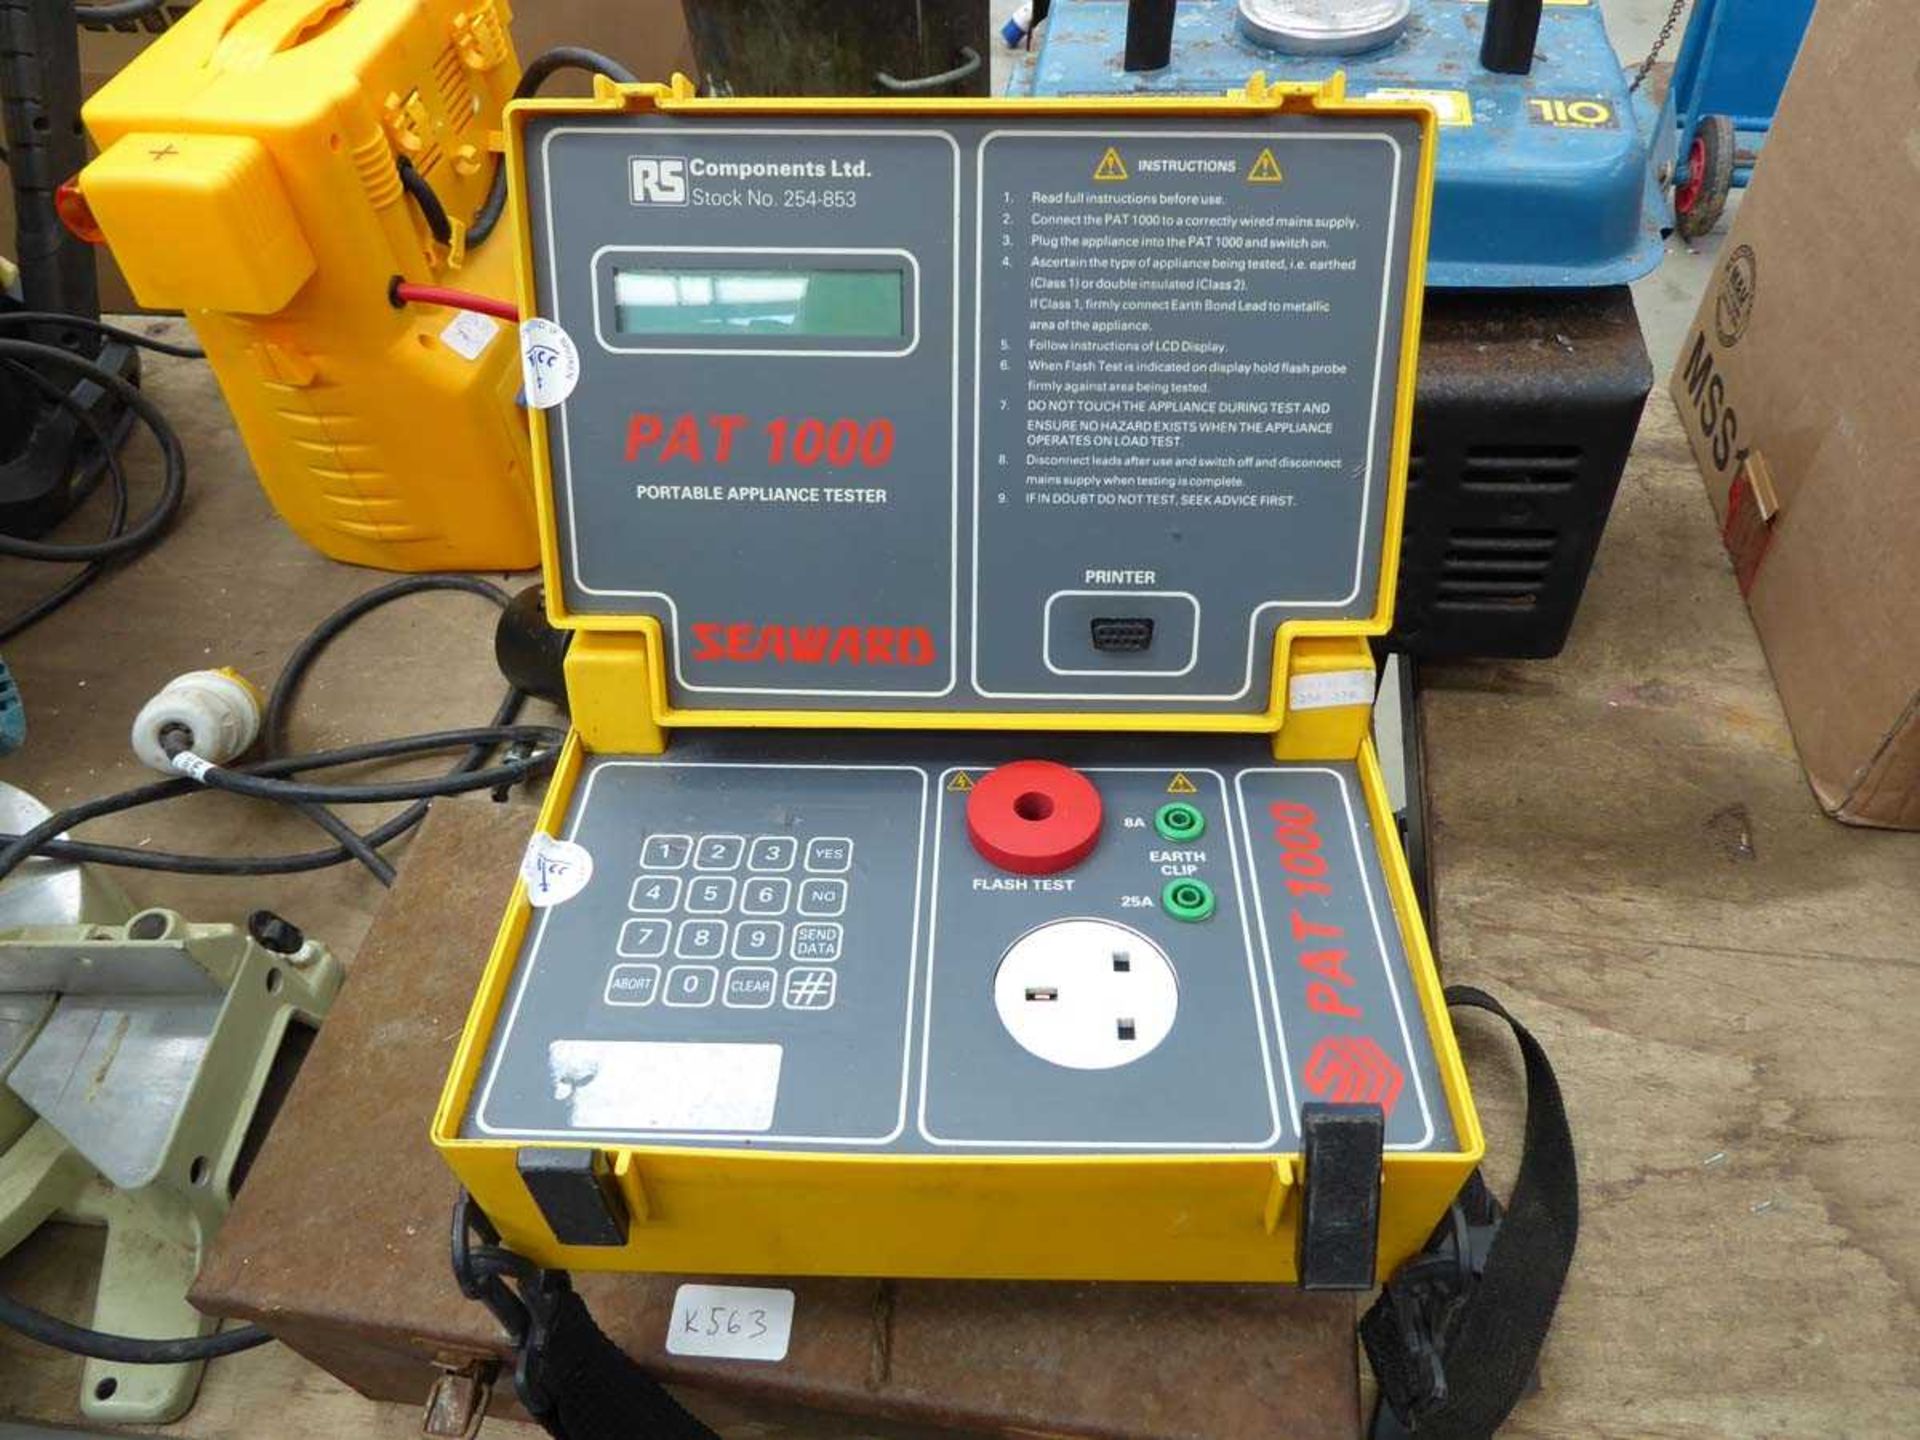 Pat testing machine and box containing pipe threader